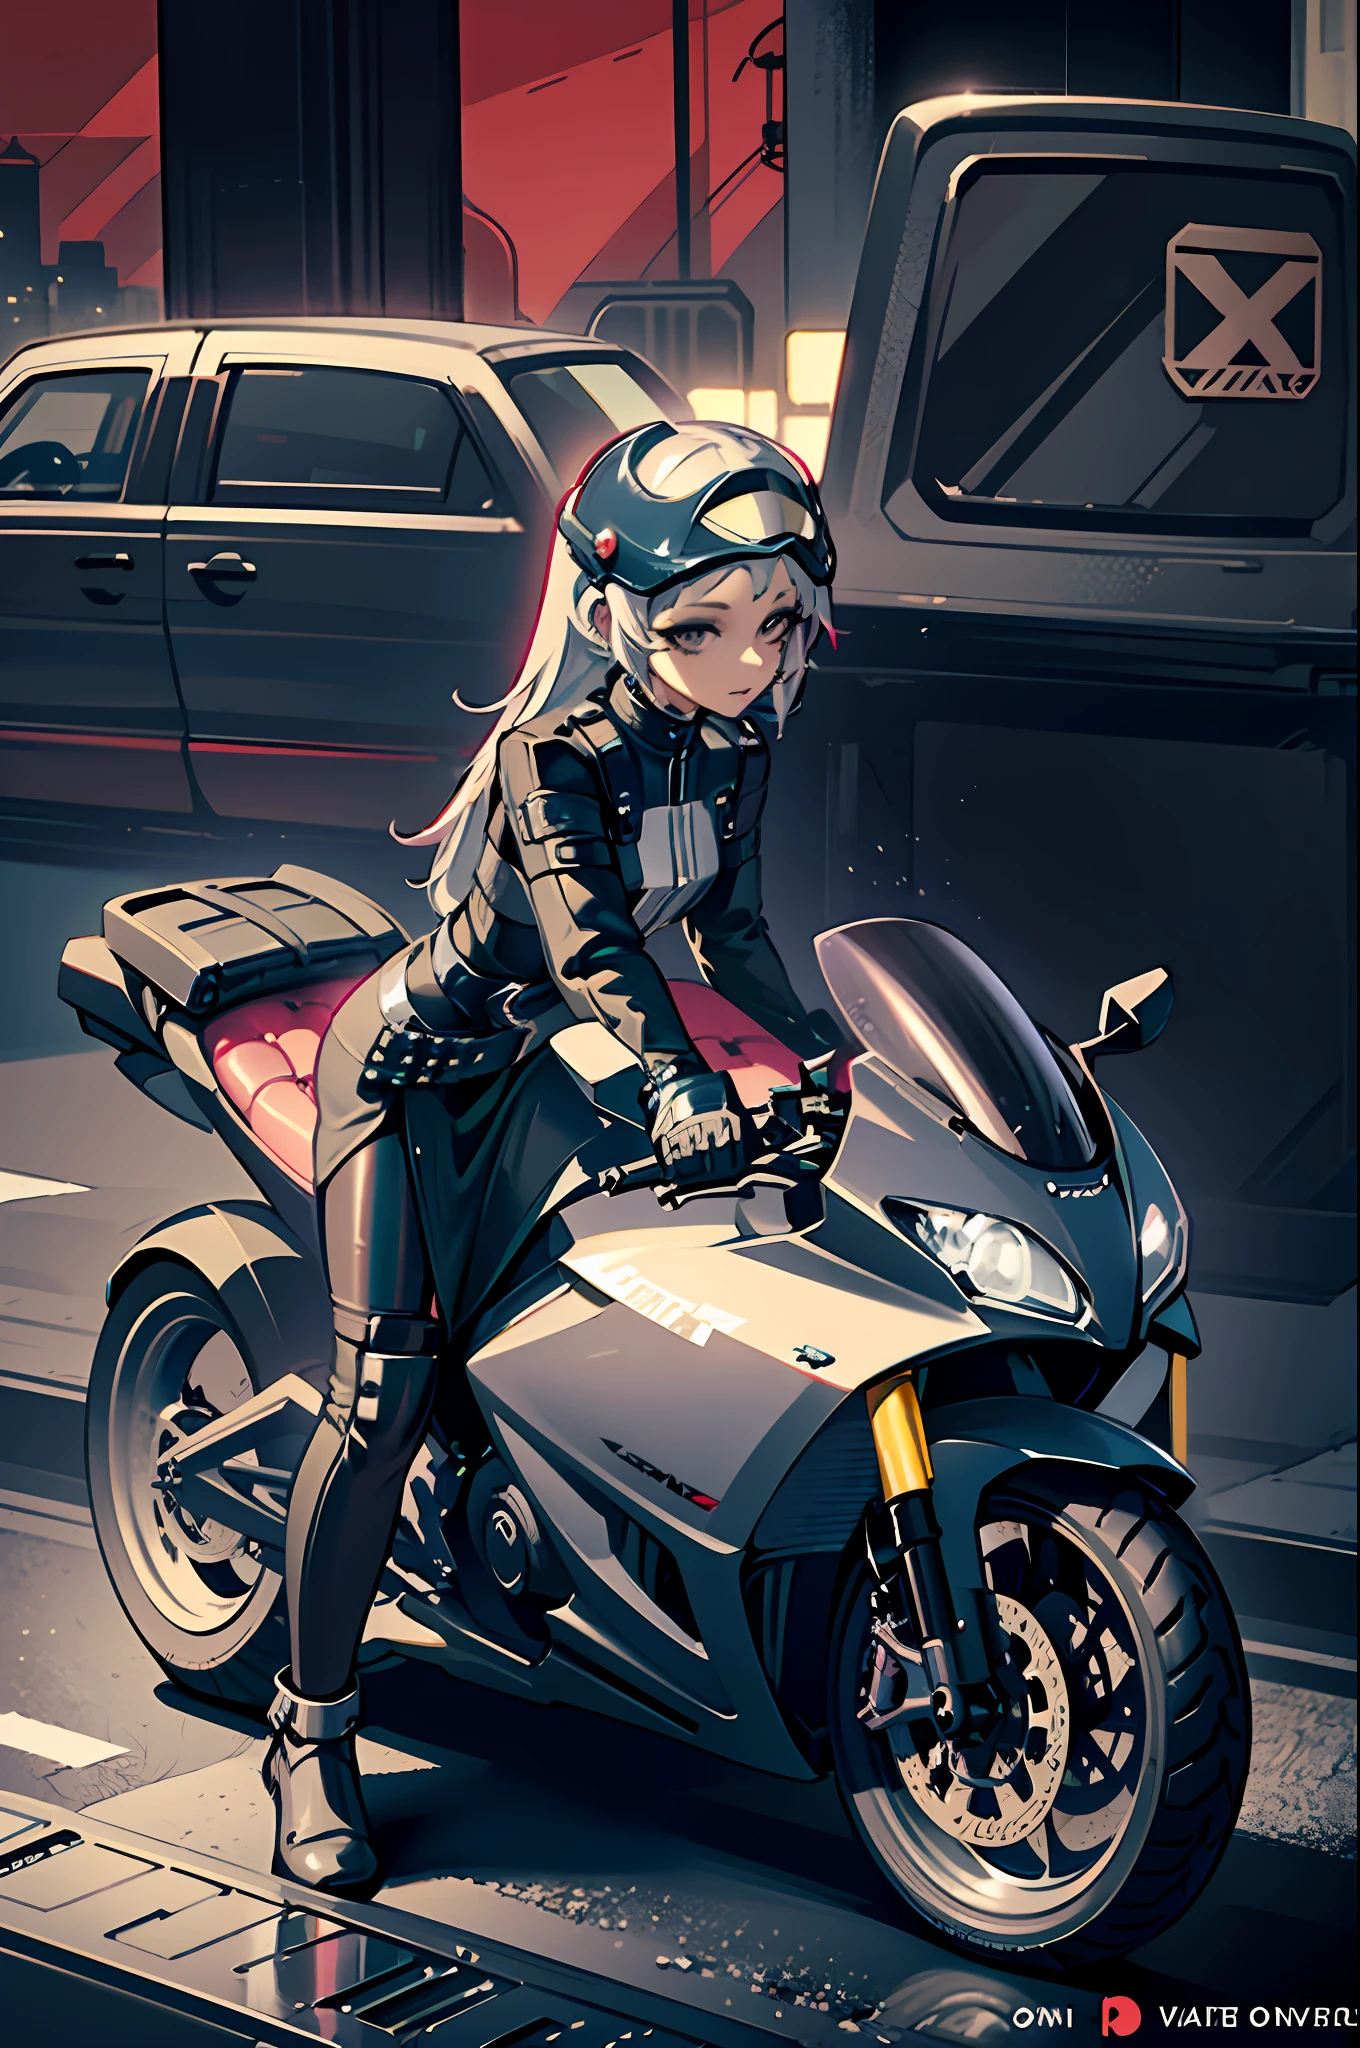 araffe on a motorcycle with a helmet on and a woman sitting on the seat, wearing her helmet, without helmet, wearing a helmet, riding a motorcycle, wearing helmet, picture of a female biker, motorcycle, riding a futuristic motorcycle, motorbiker, biker, sitting on a motorcycle, sitting on cyberpunk motorbike, motorcycle helmet, riding a motorbike